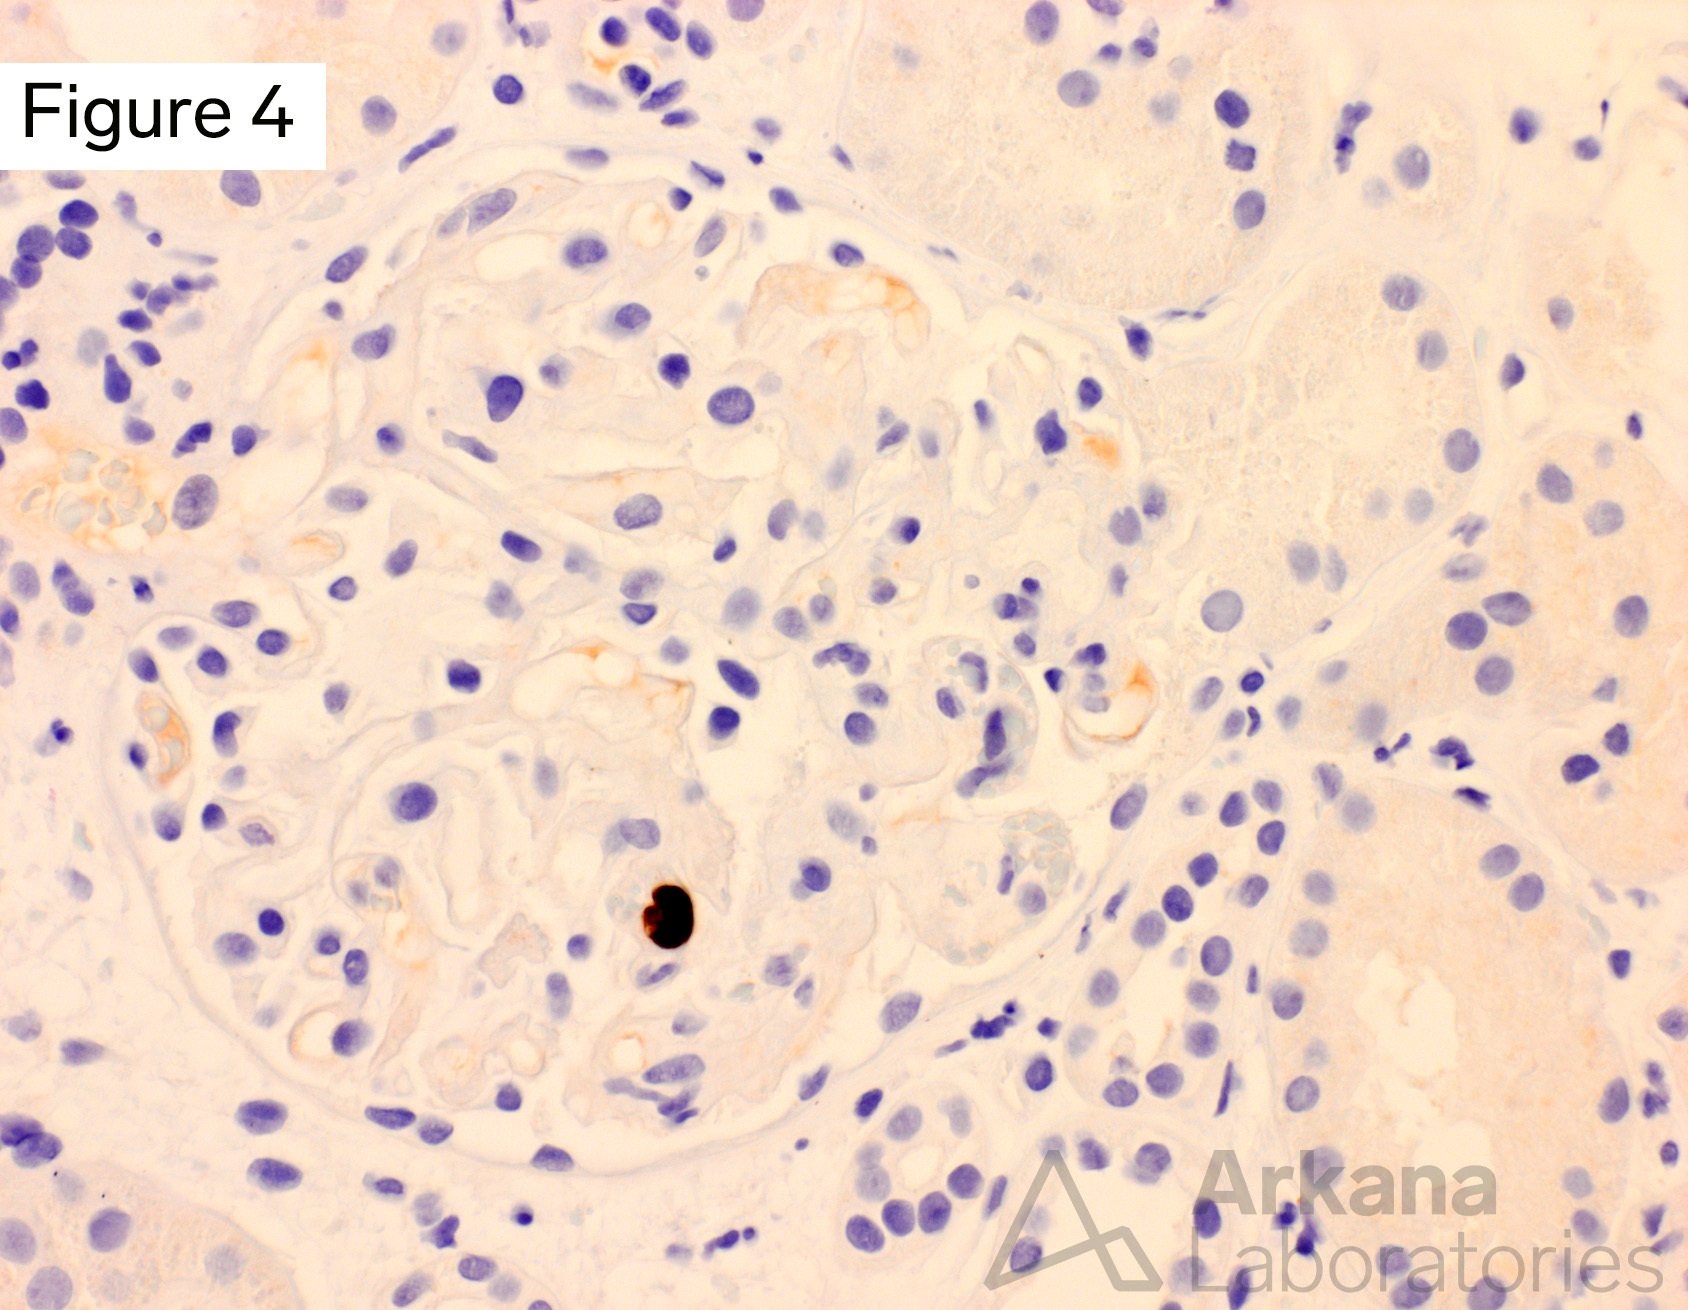 MV immunohistochemical stain was performed and was positive within a single glomerular endothelial cell